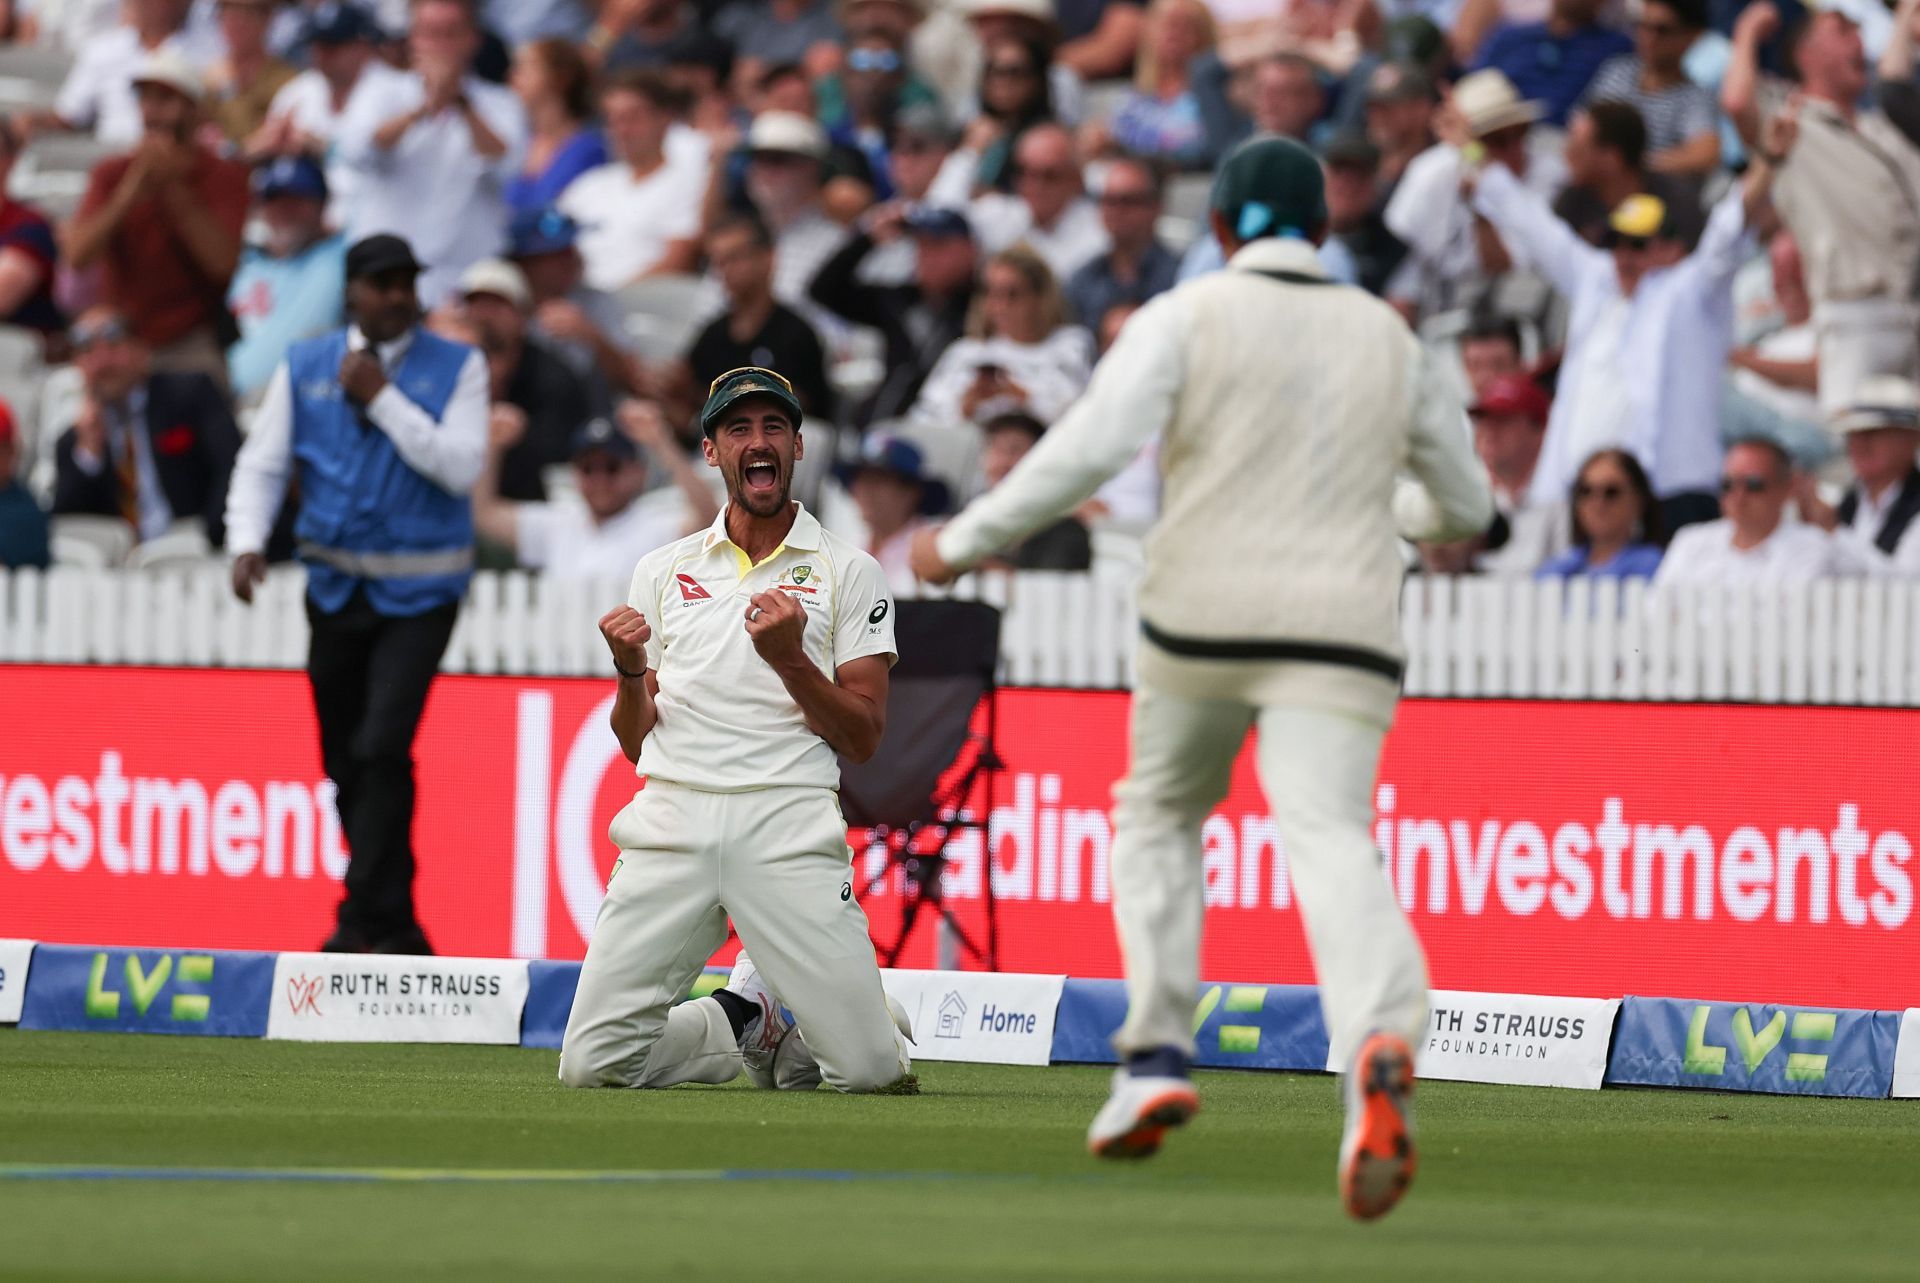 Mitchell Starc was sure that he had taken a clean catch.